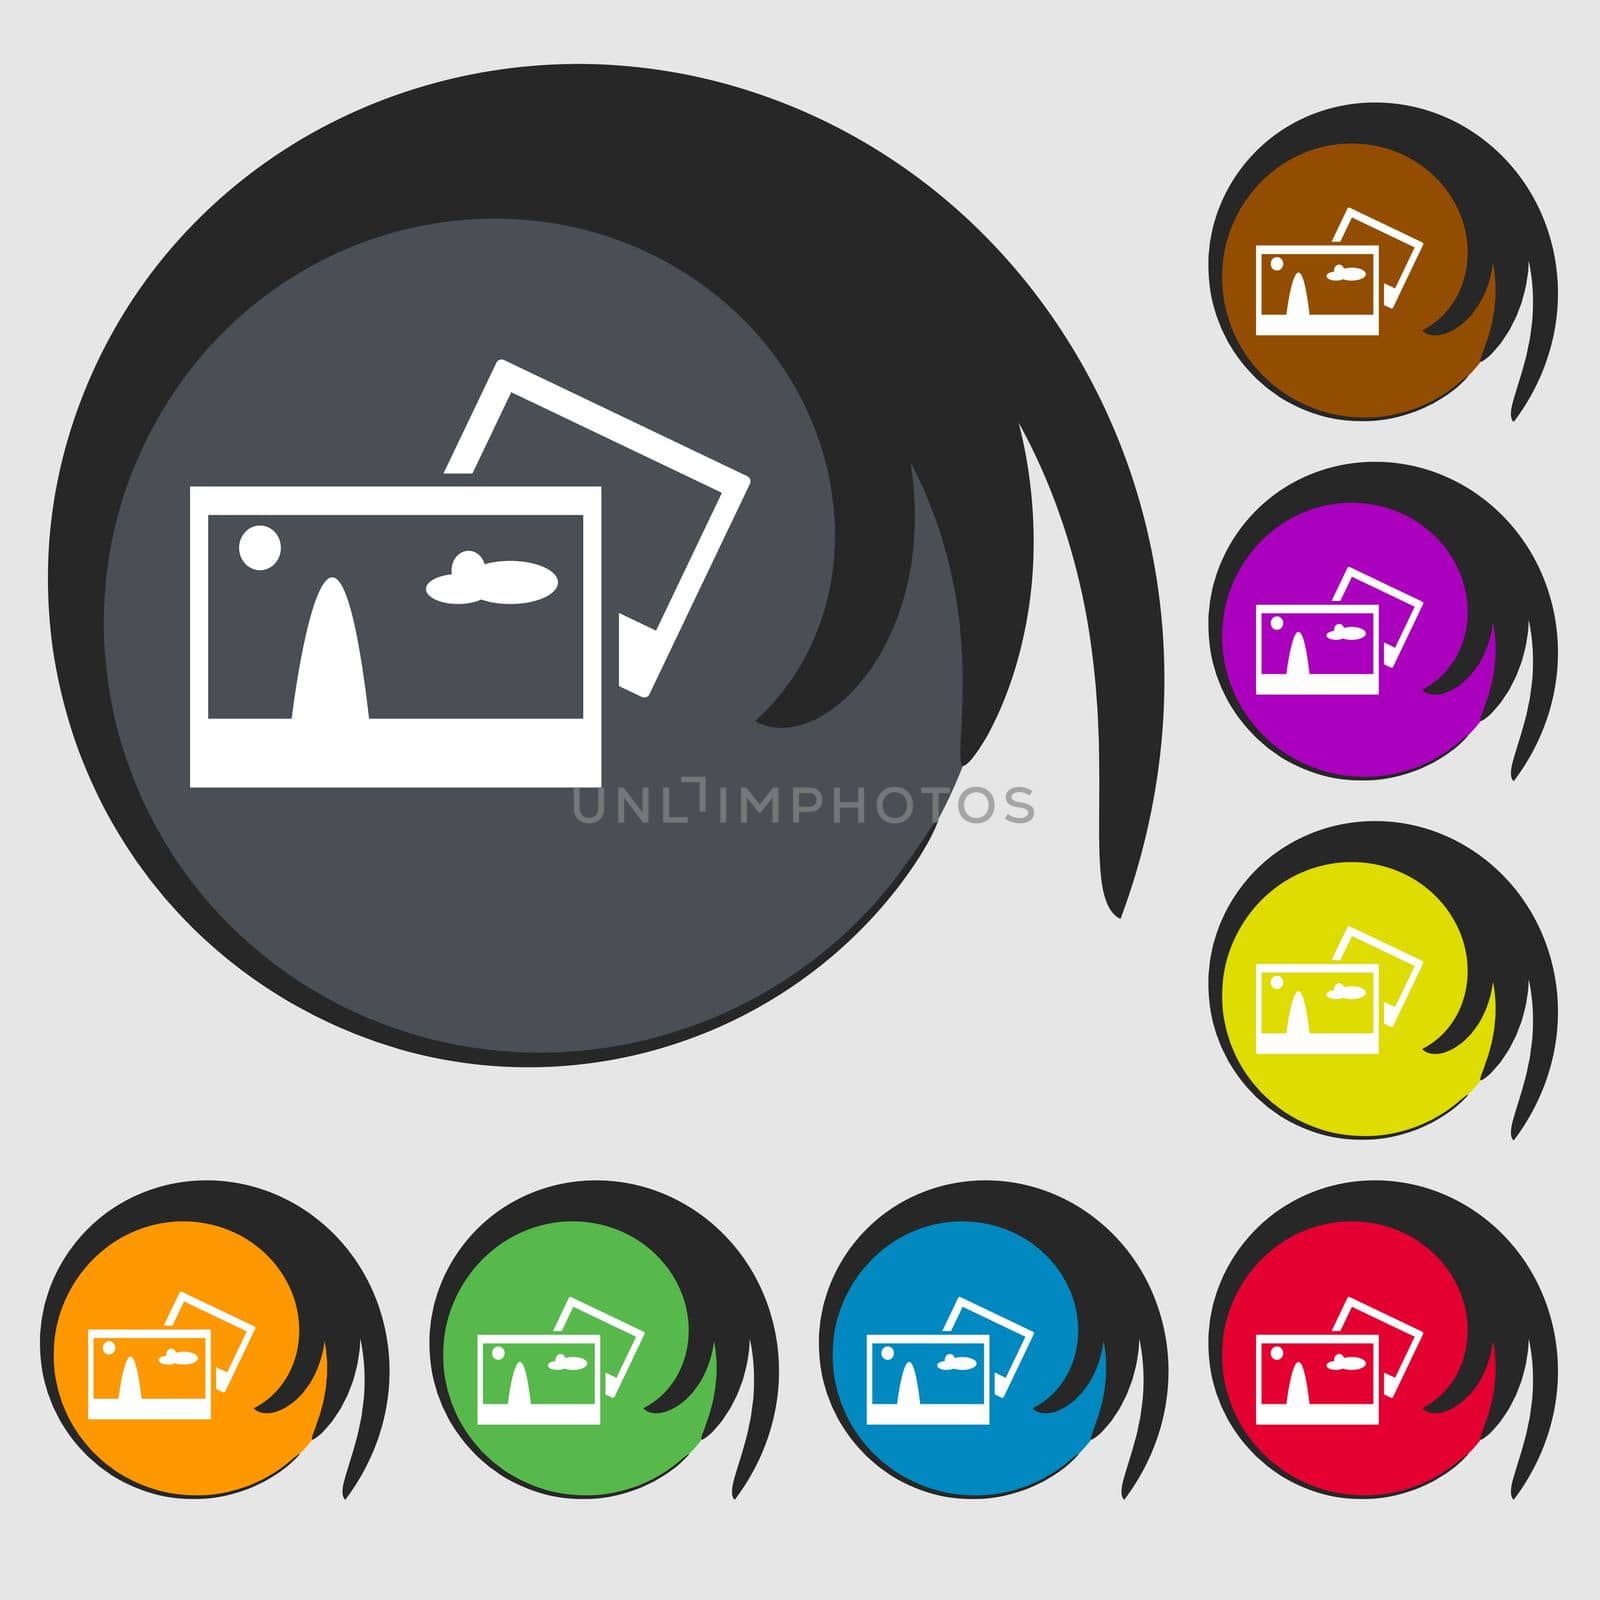 Copy File JPG sign icon. Download image file symbol. Symbols on eight colored buttons. illustration